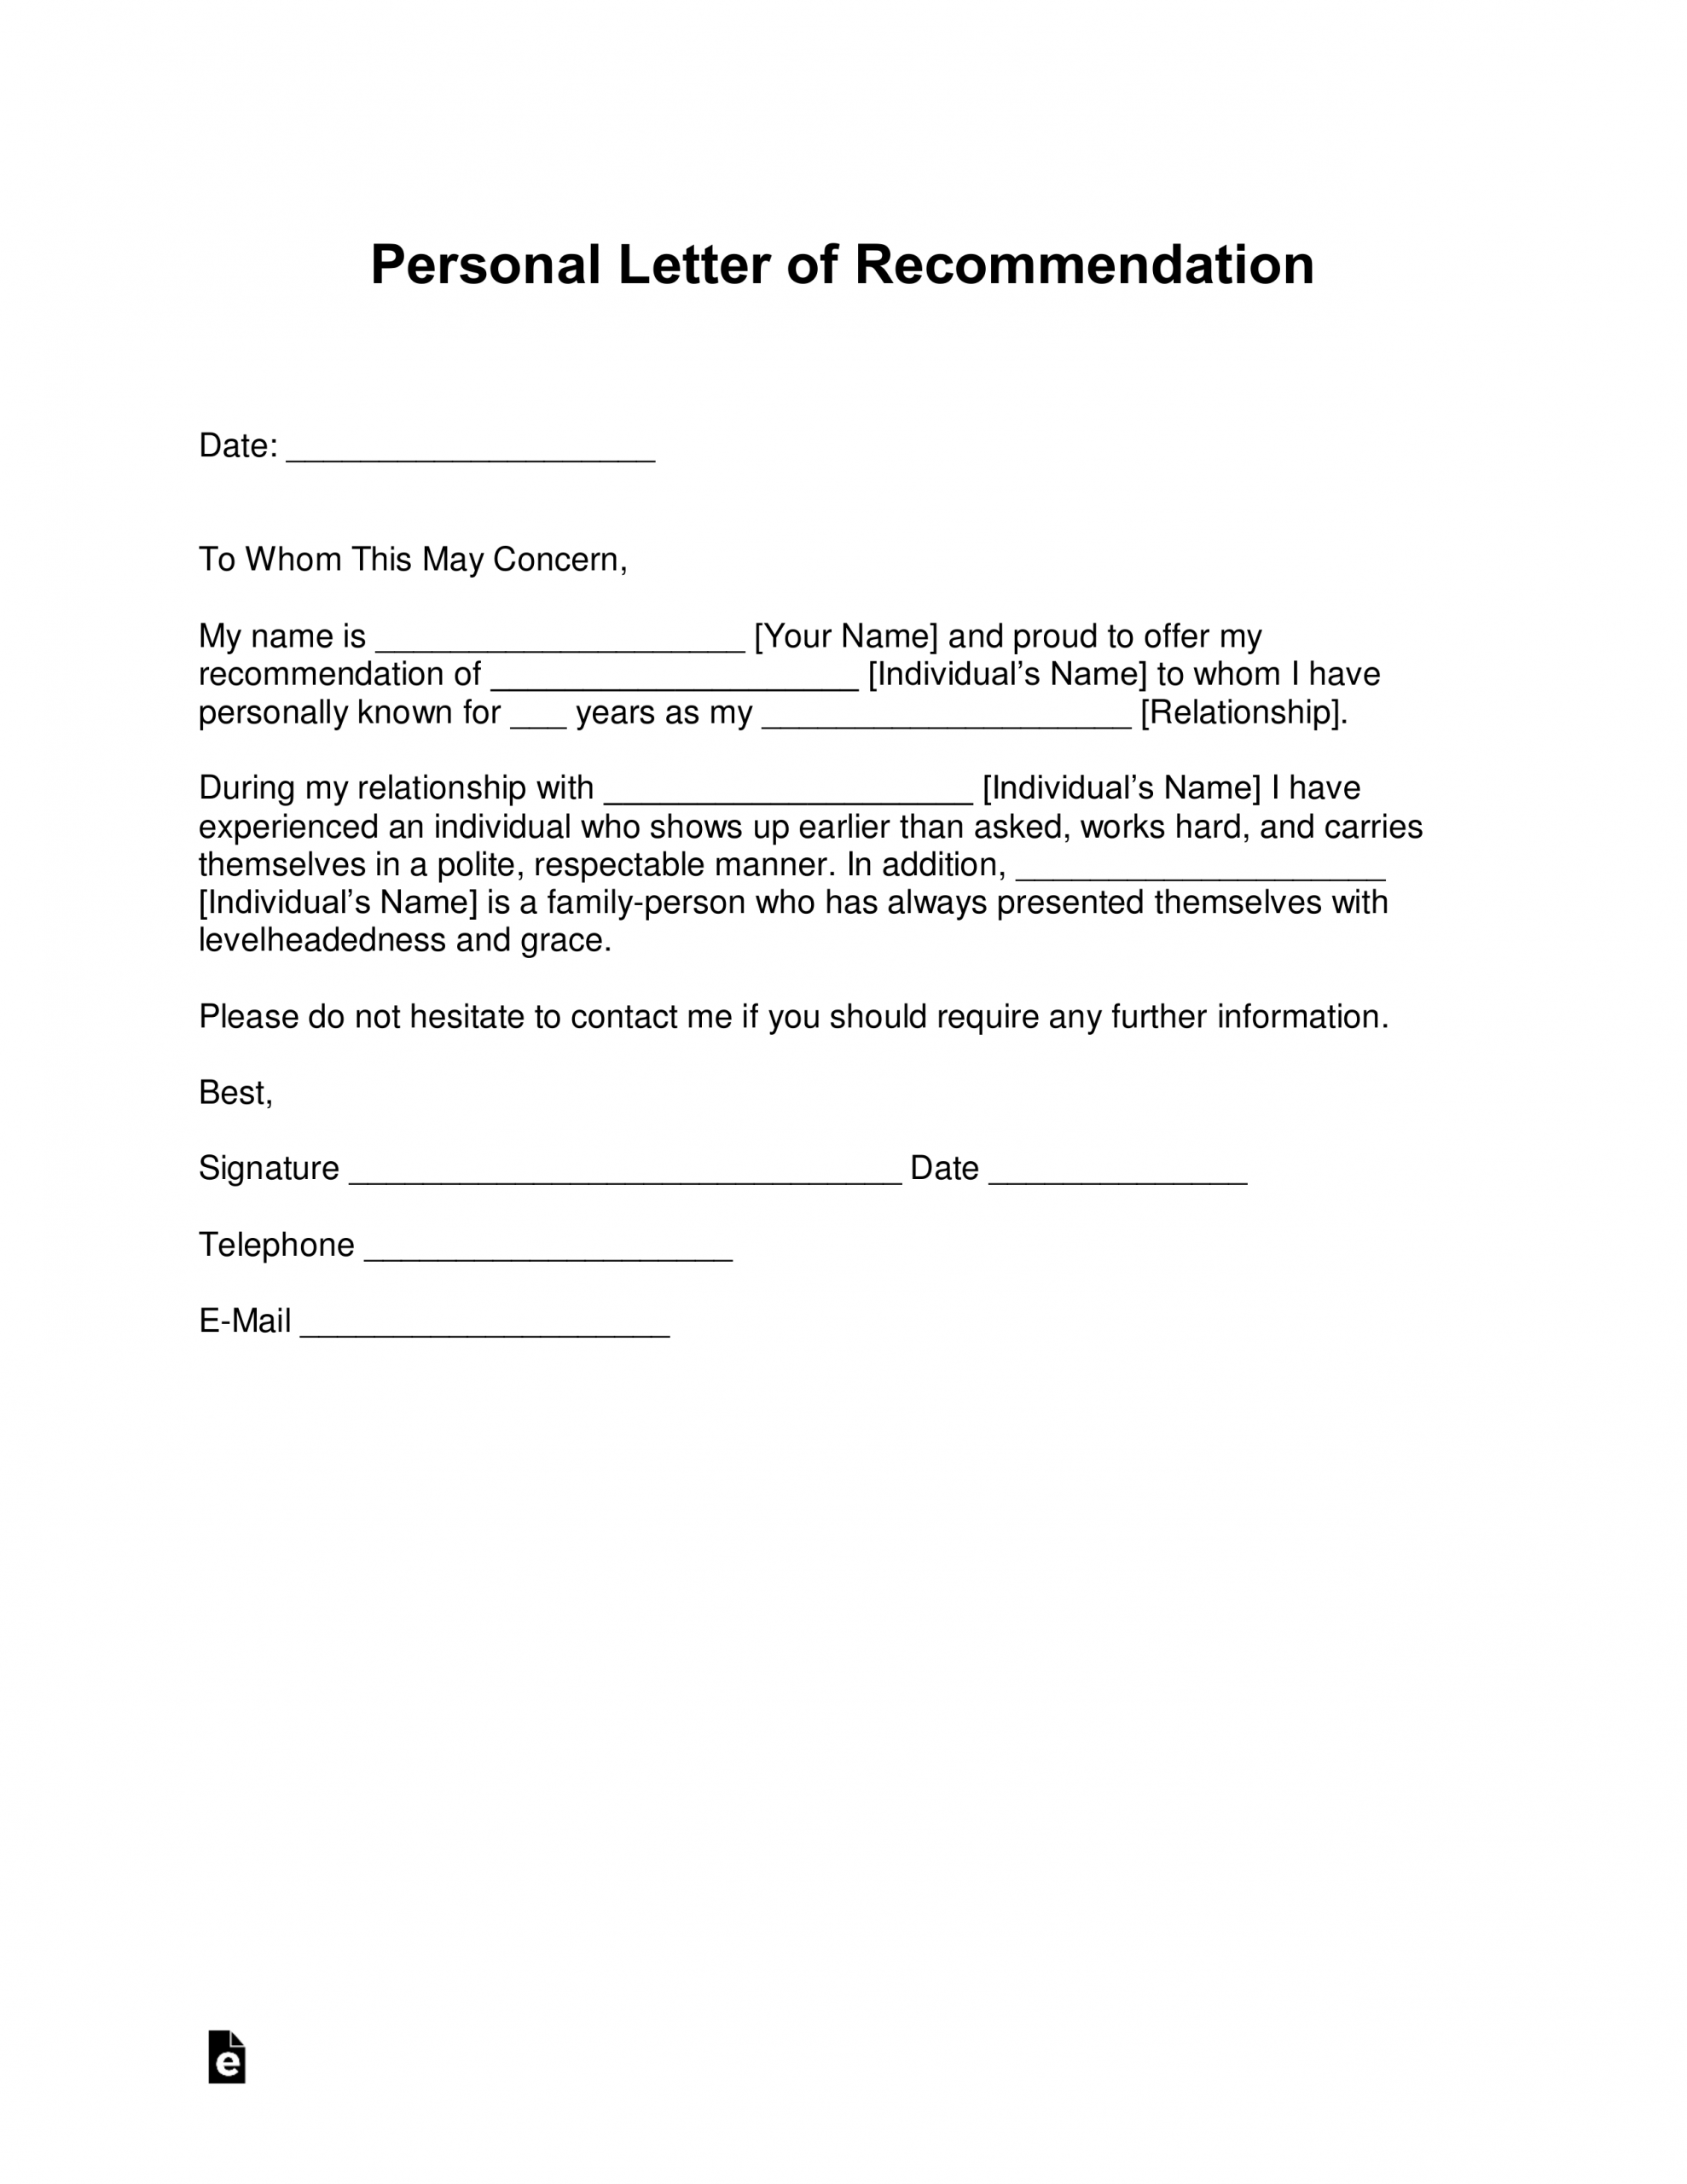 Free Personal Letter Of Recommendation Template For A within dimensions 2550 X 3301